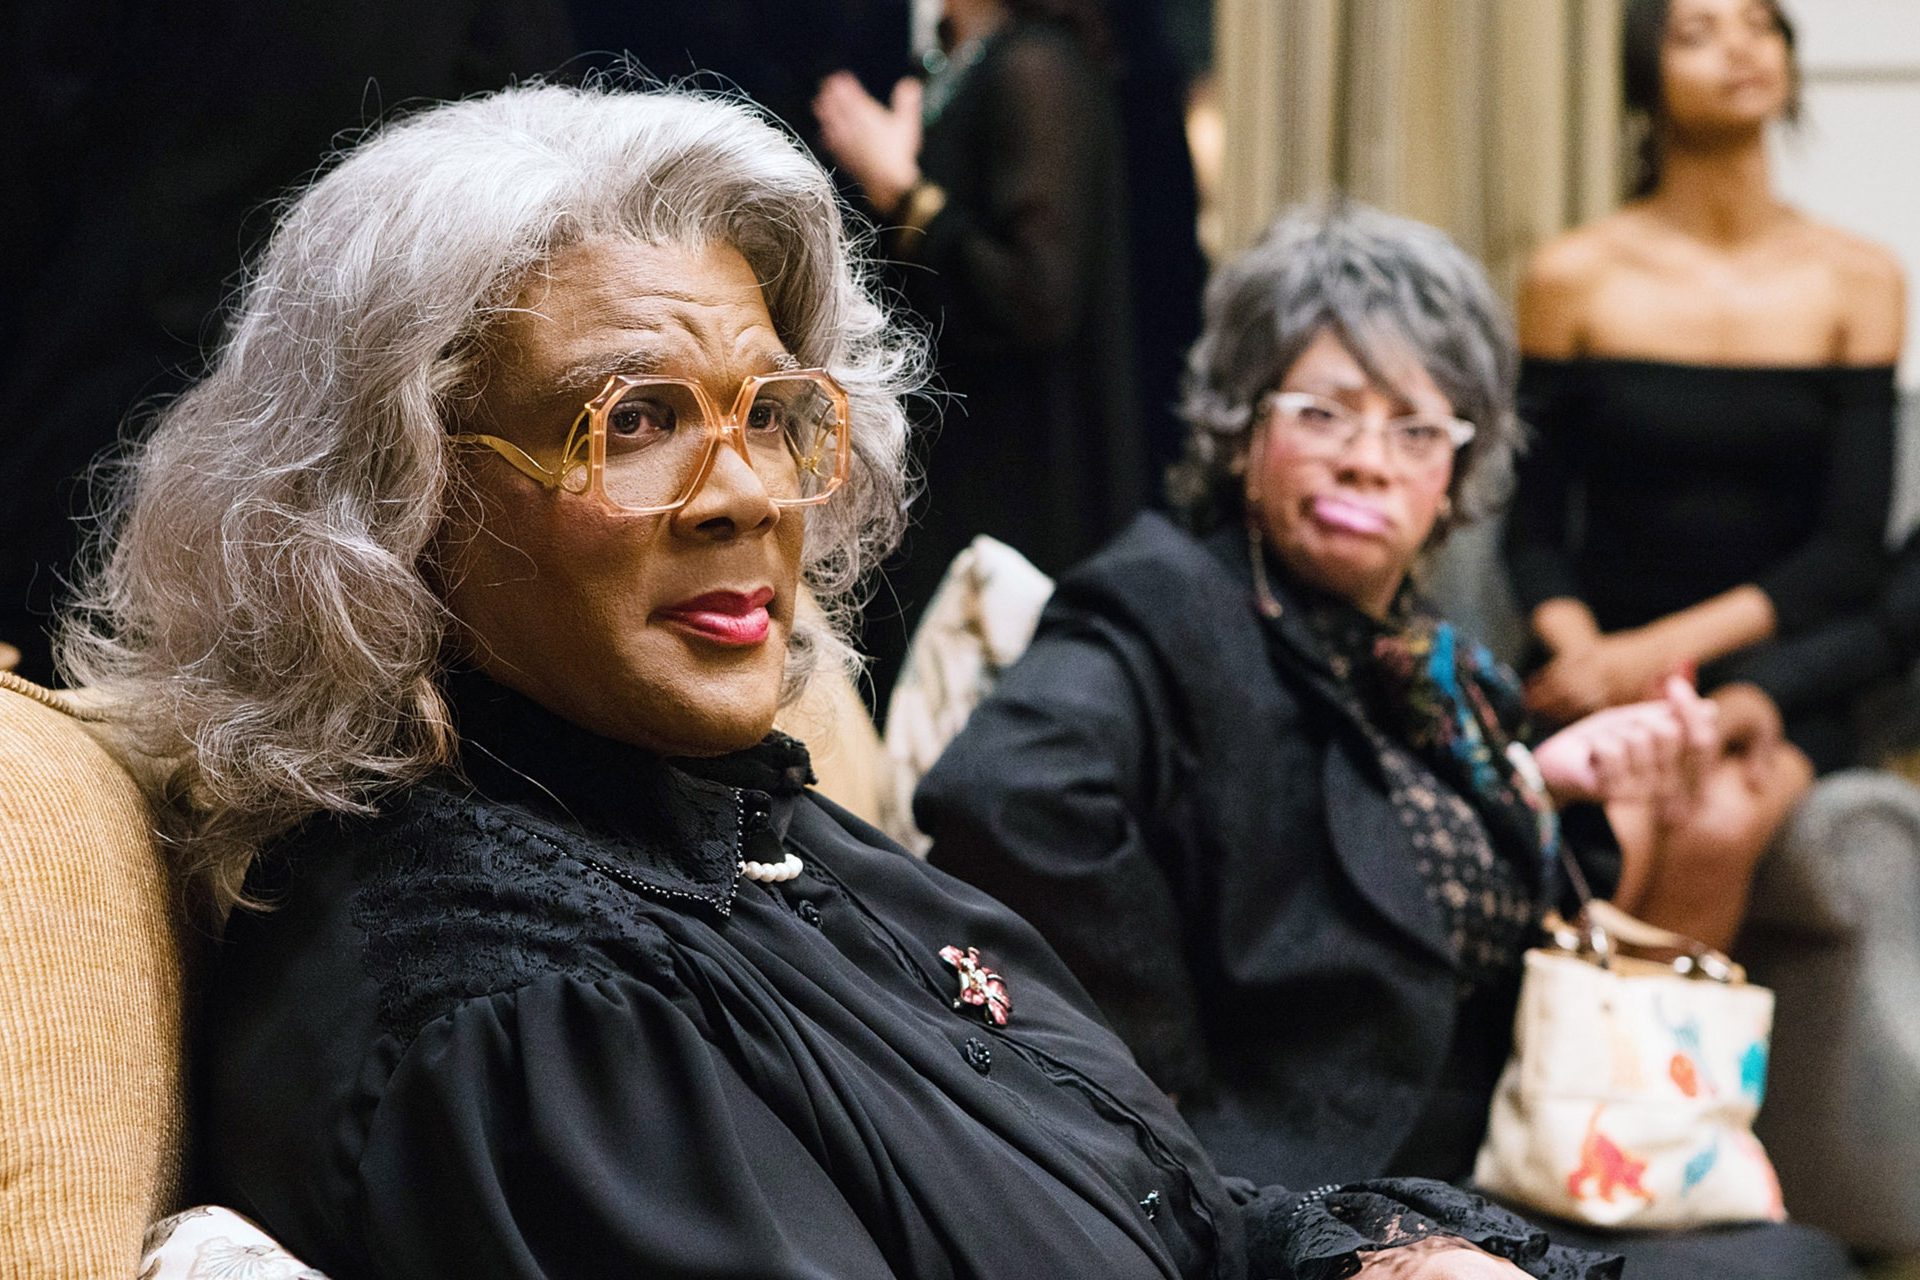 Image of Tyler Perry playing his character Madea